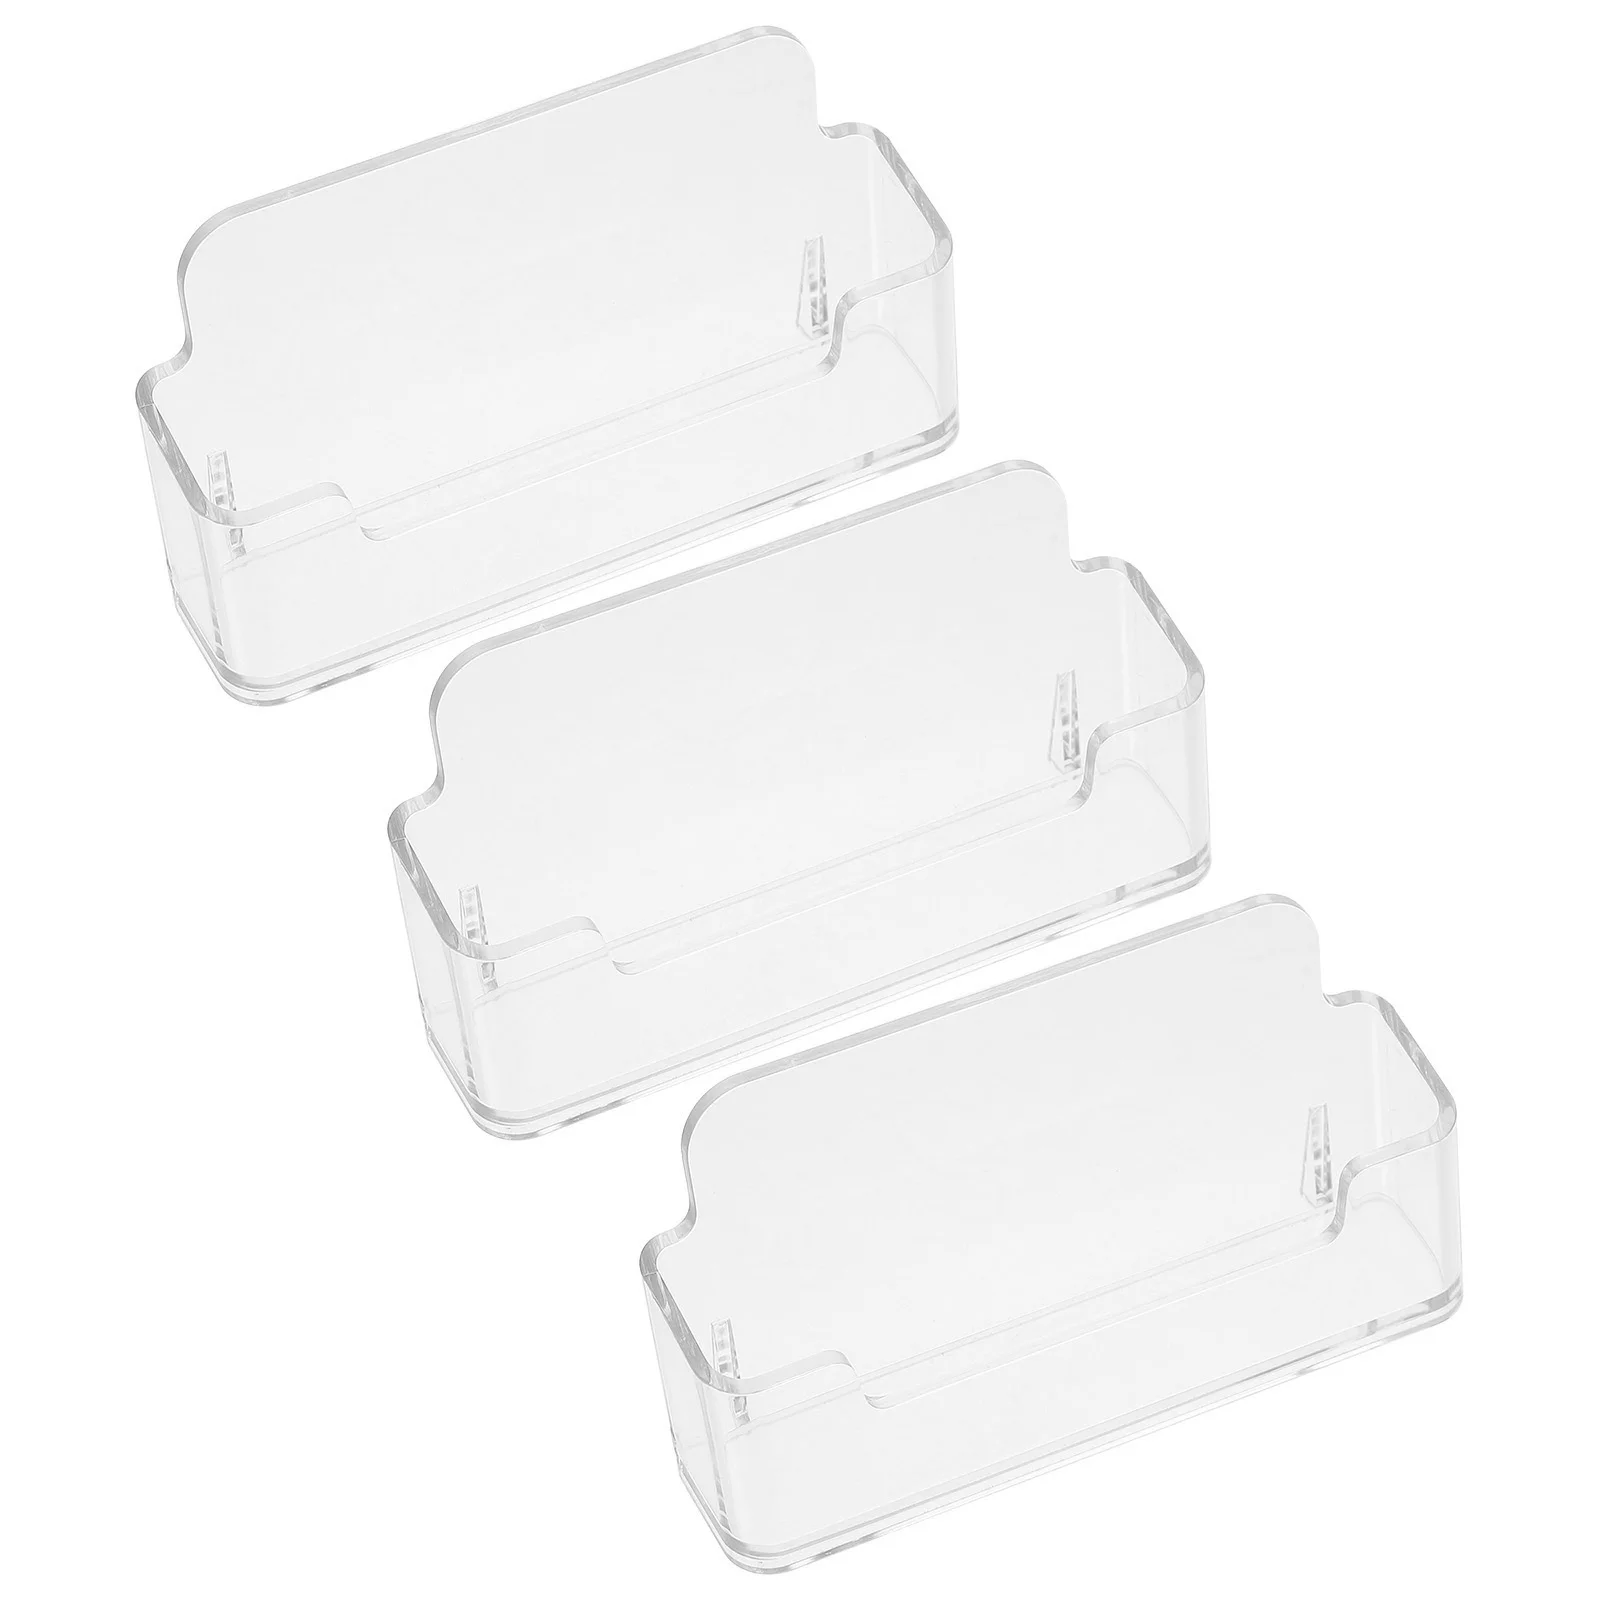 3Pcs Business Cards Holder Transparent Cards Organizer Clear Cards Stand Acrylic Business Cards Holder 3pcs business cards holder transparent cards organizer clear cards stand acrylic business cards holder